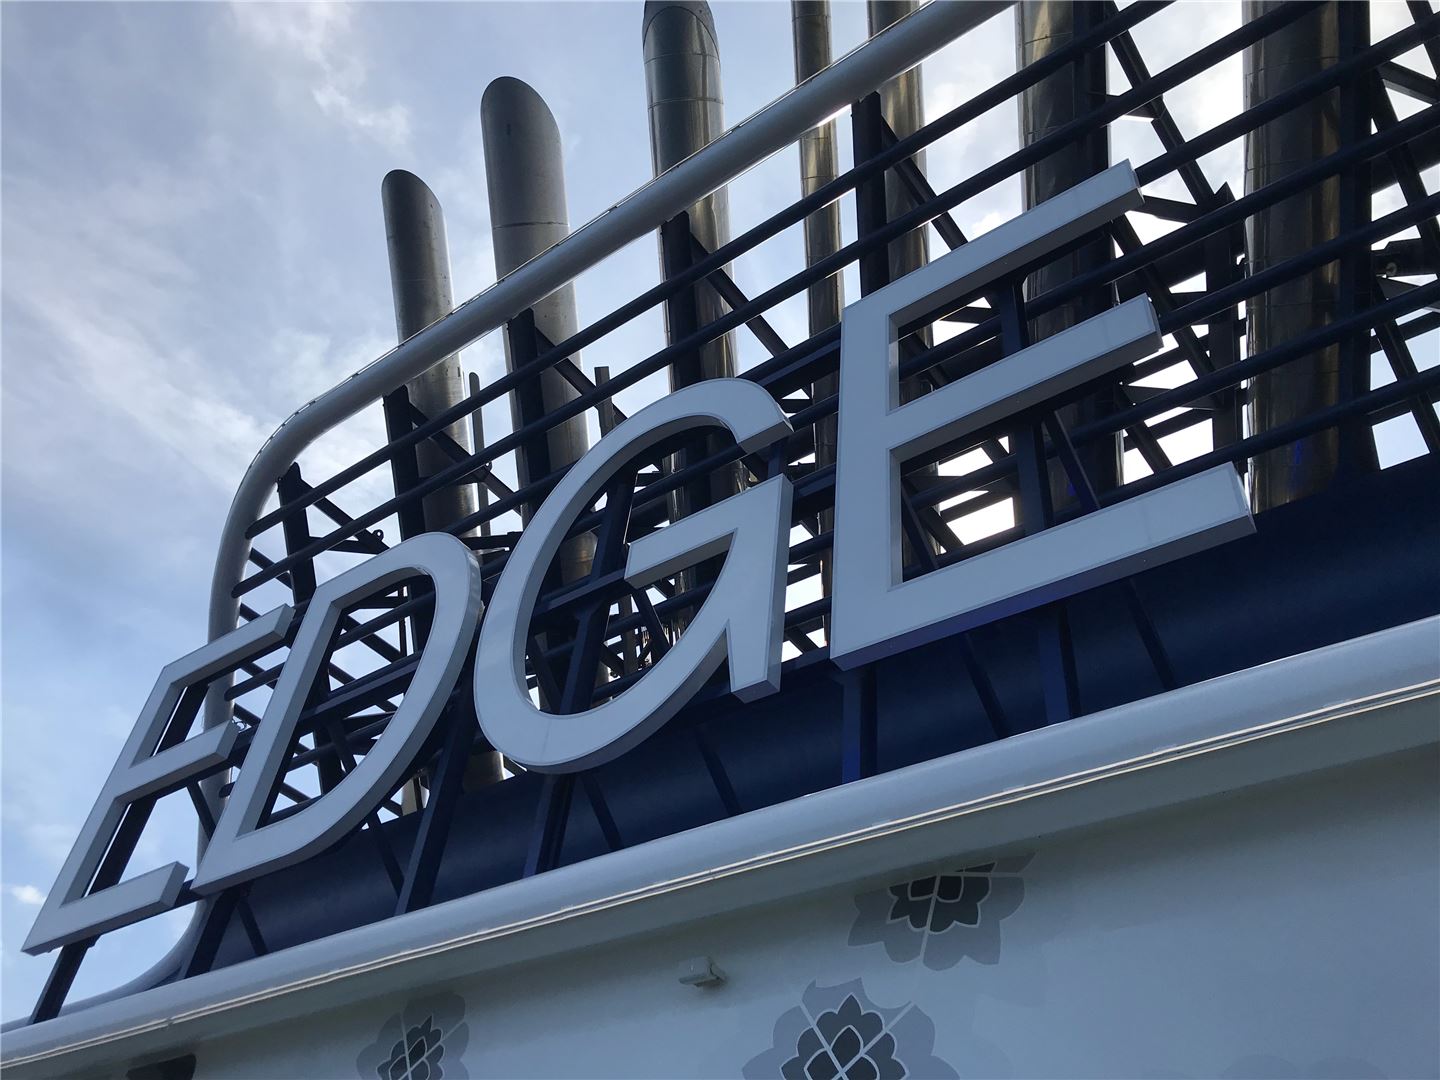 Travel Agents Call Celebrity Edge a ‘Game Changer’ for Passengers, Advisors, and Crew